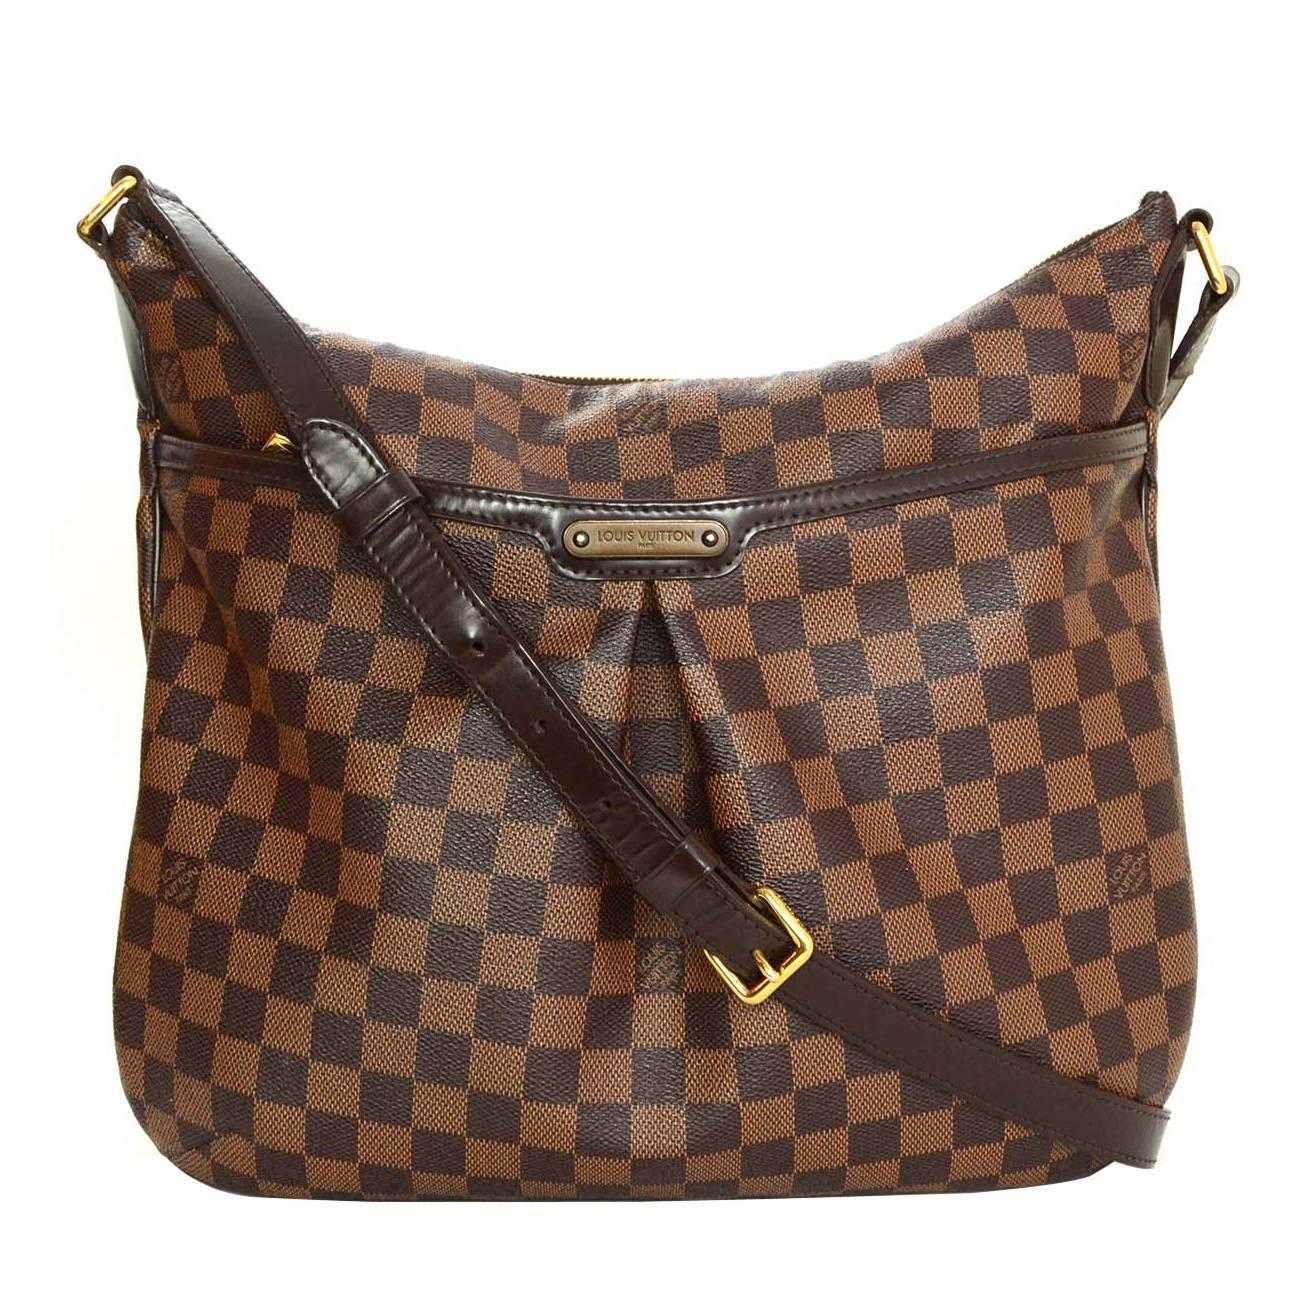 Most Popular Louis Vuitton Crossbody Bags | Confederated Tribes of the Umatilla Indian Reservation